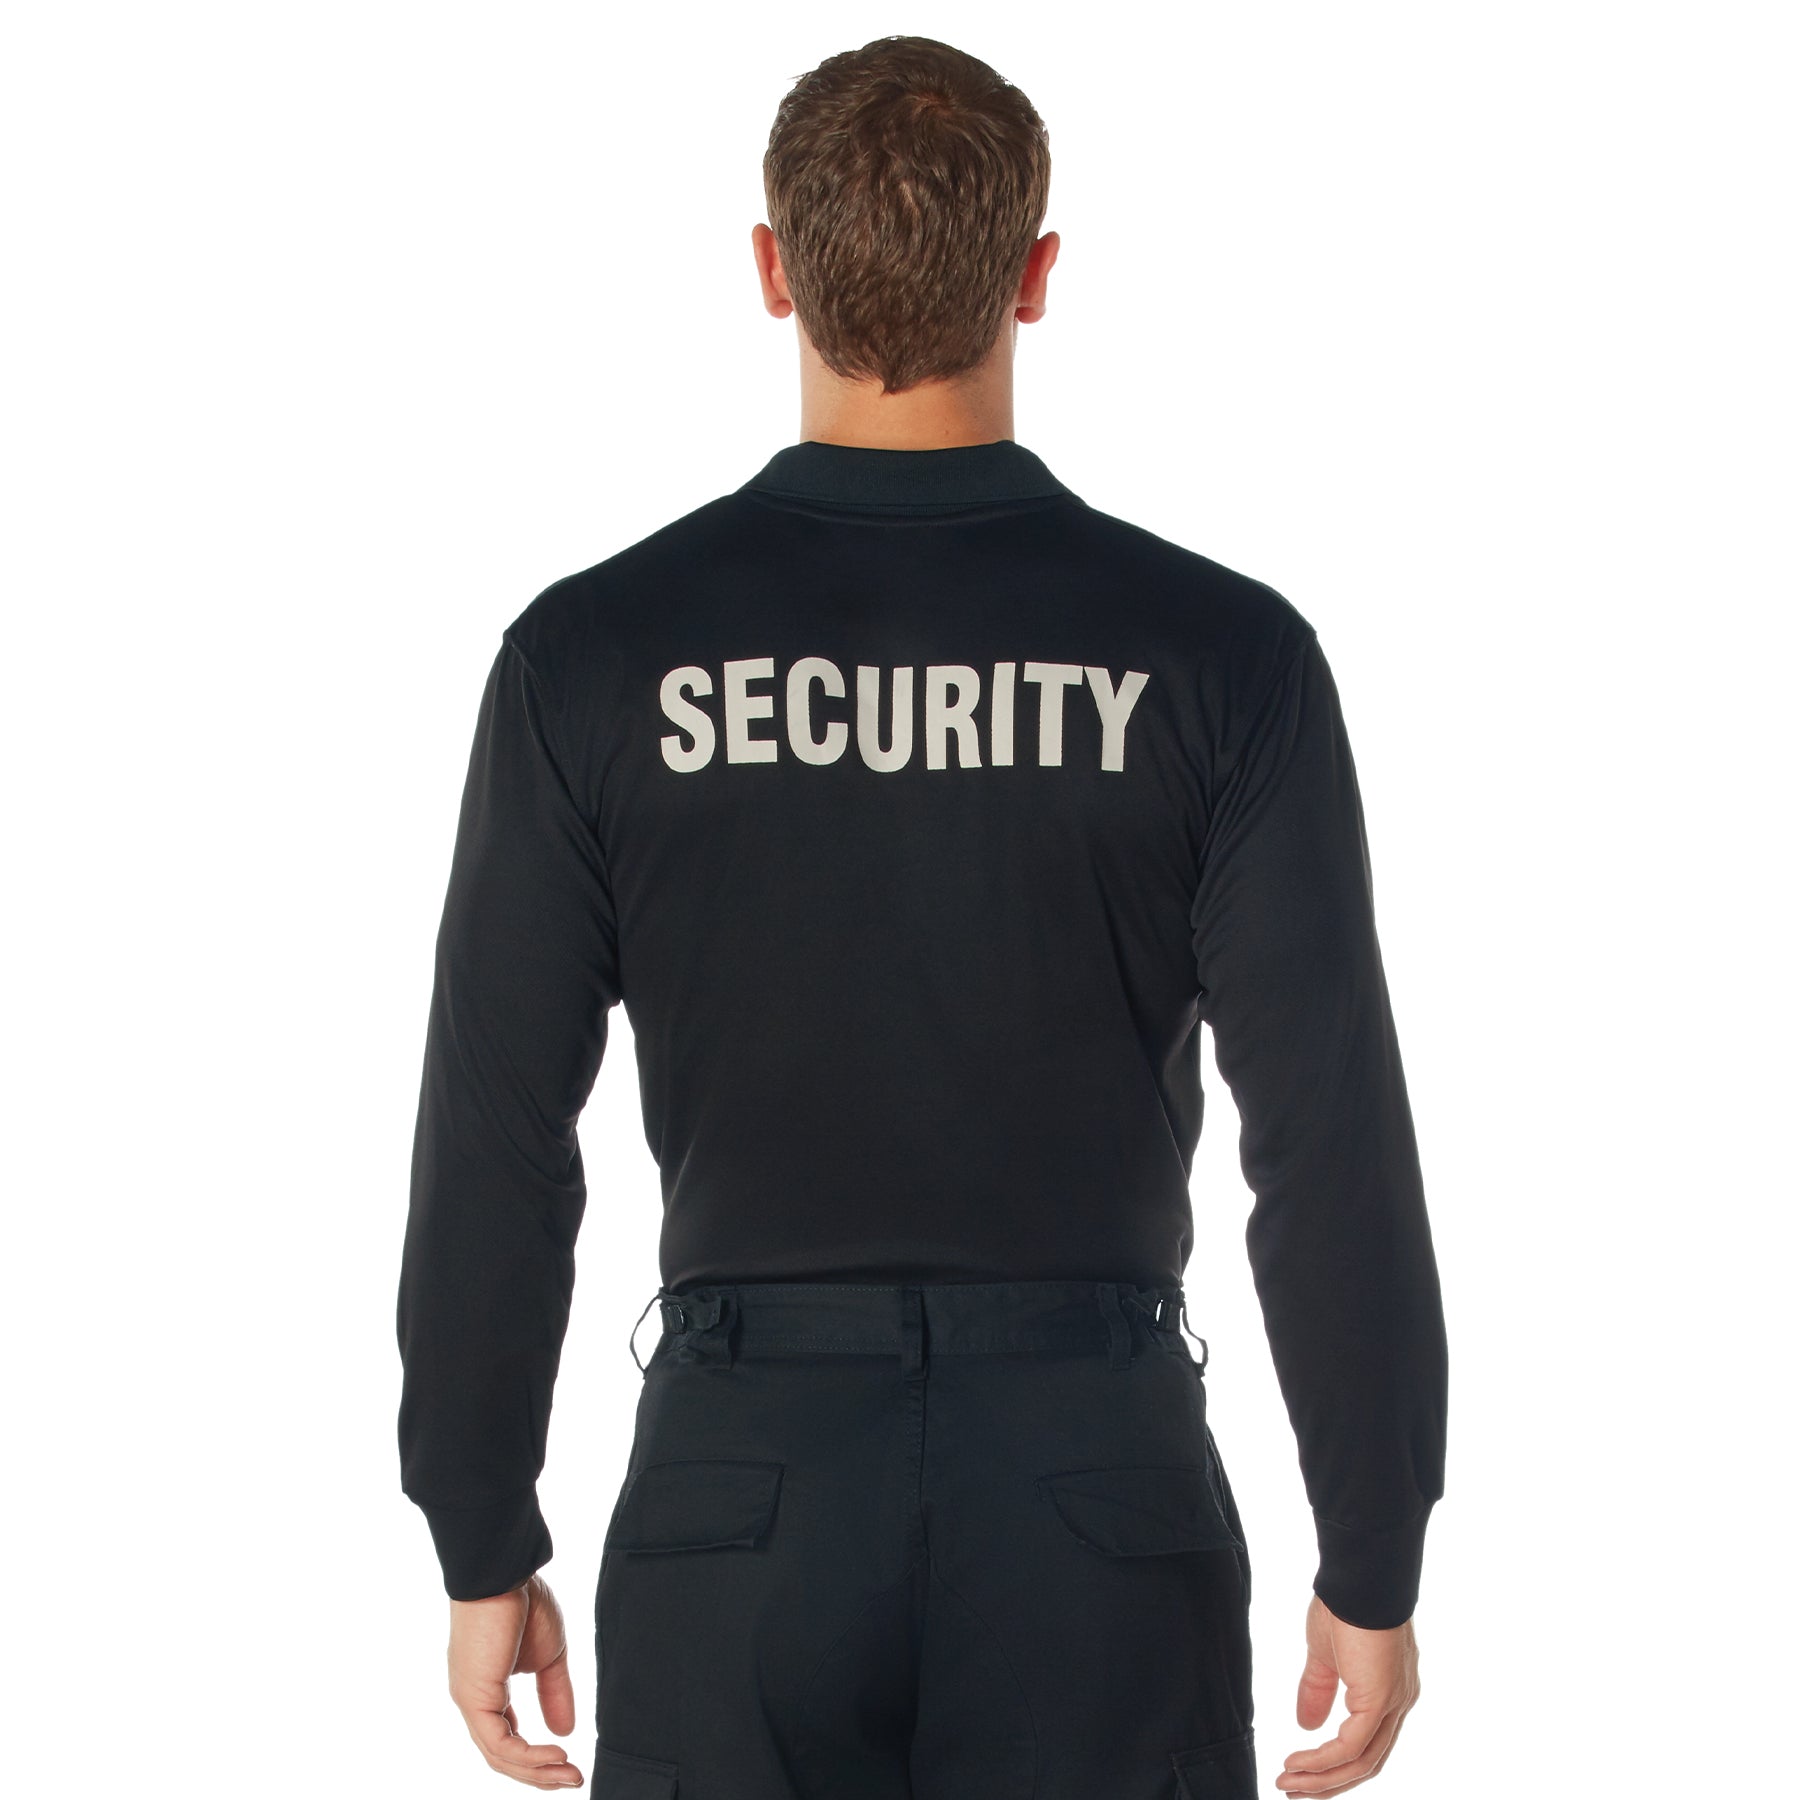 [Public Safety] Poly Moisture Wicking Security Polo Shirts